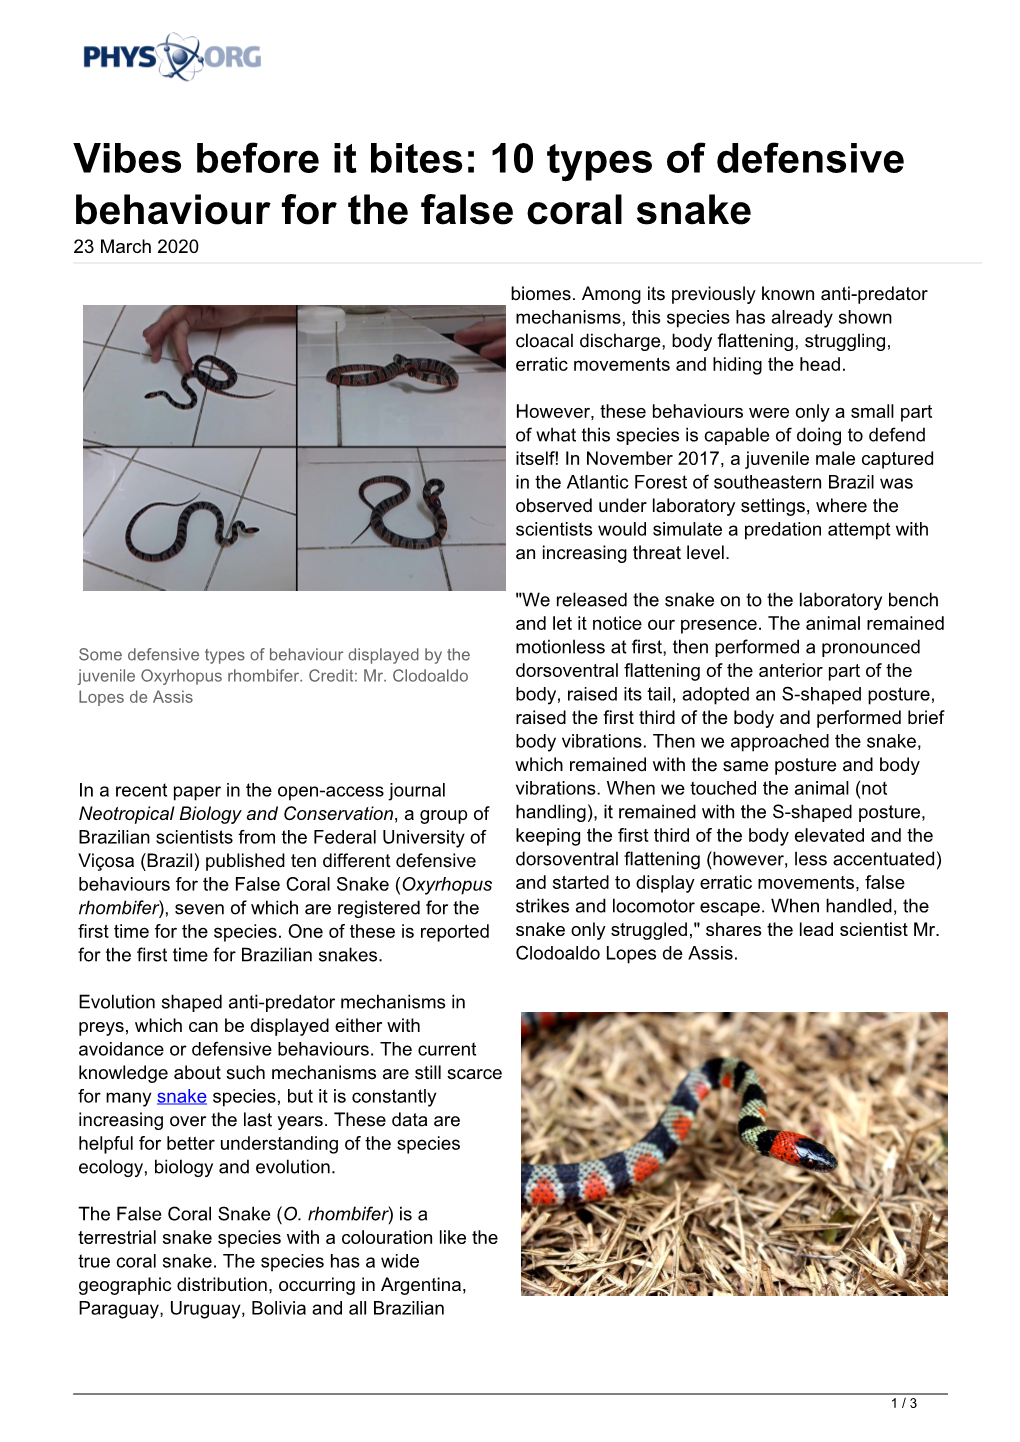 10 Types of Defensive Behaviour for the False Coral Snake 23 March 2020